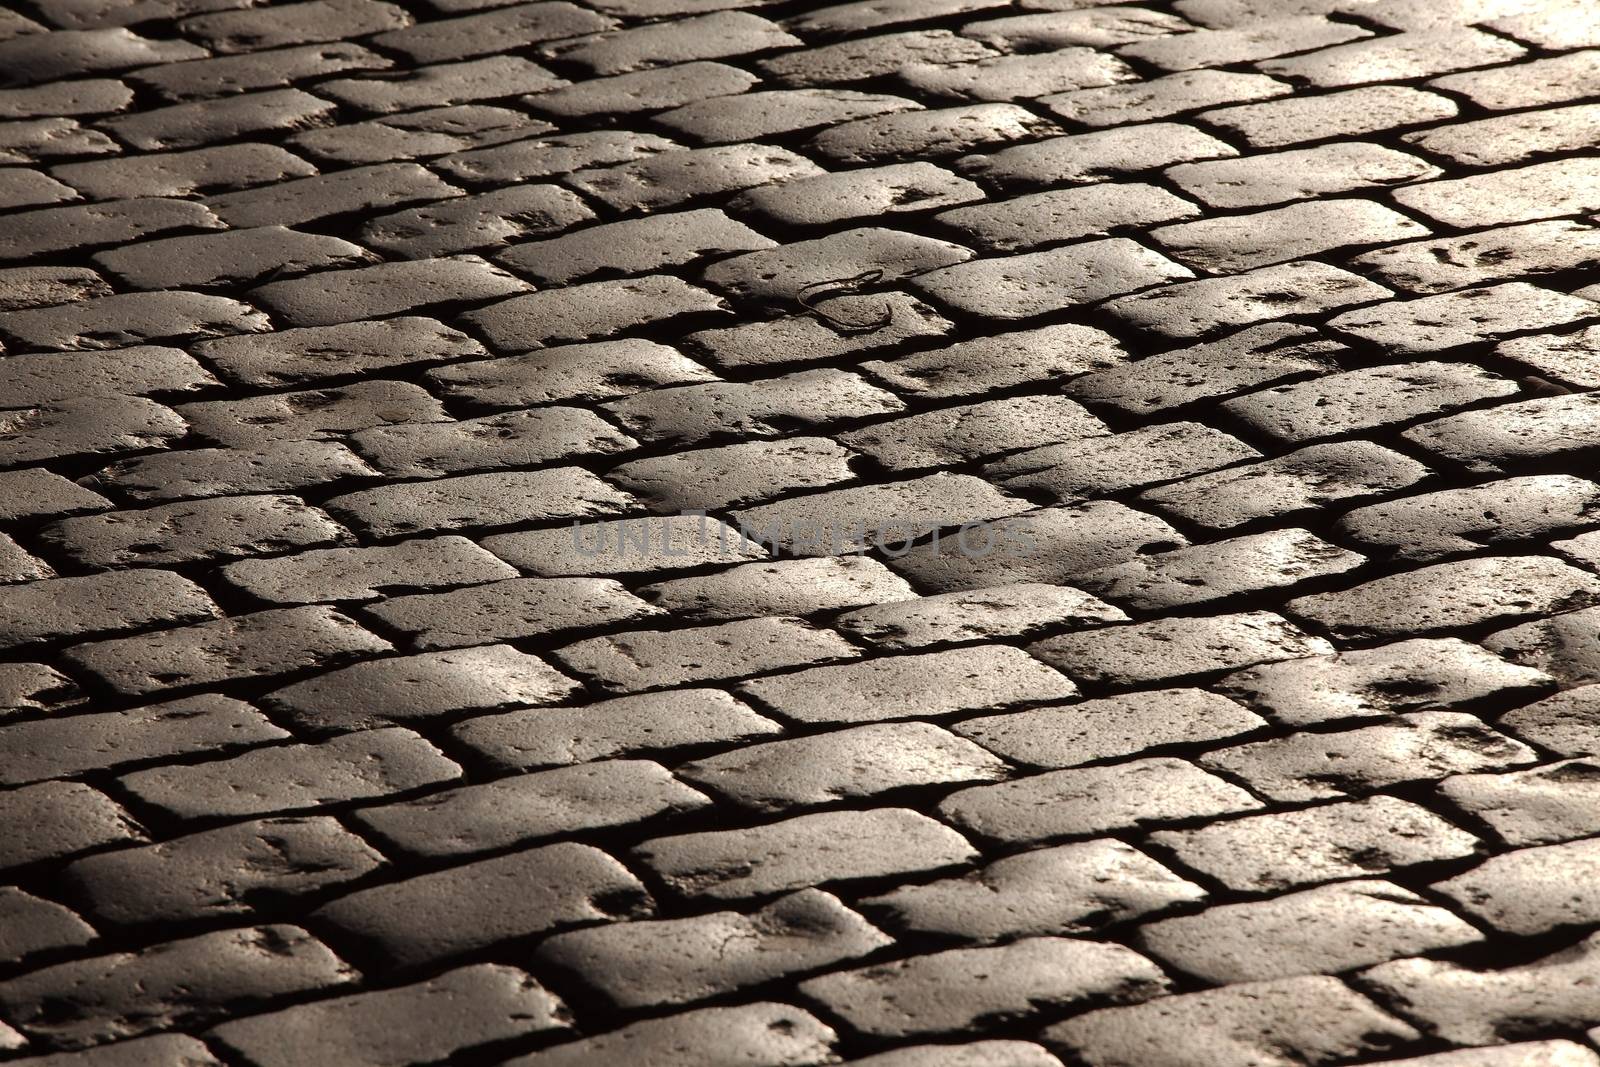 Pavement made of old stones